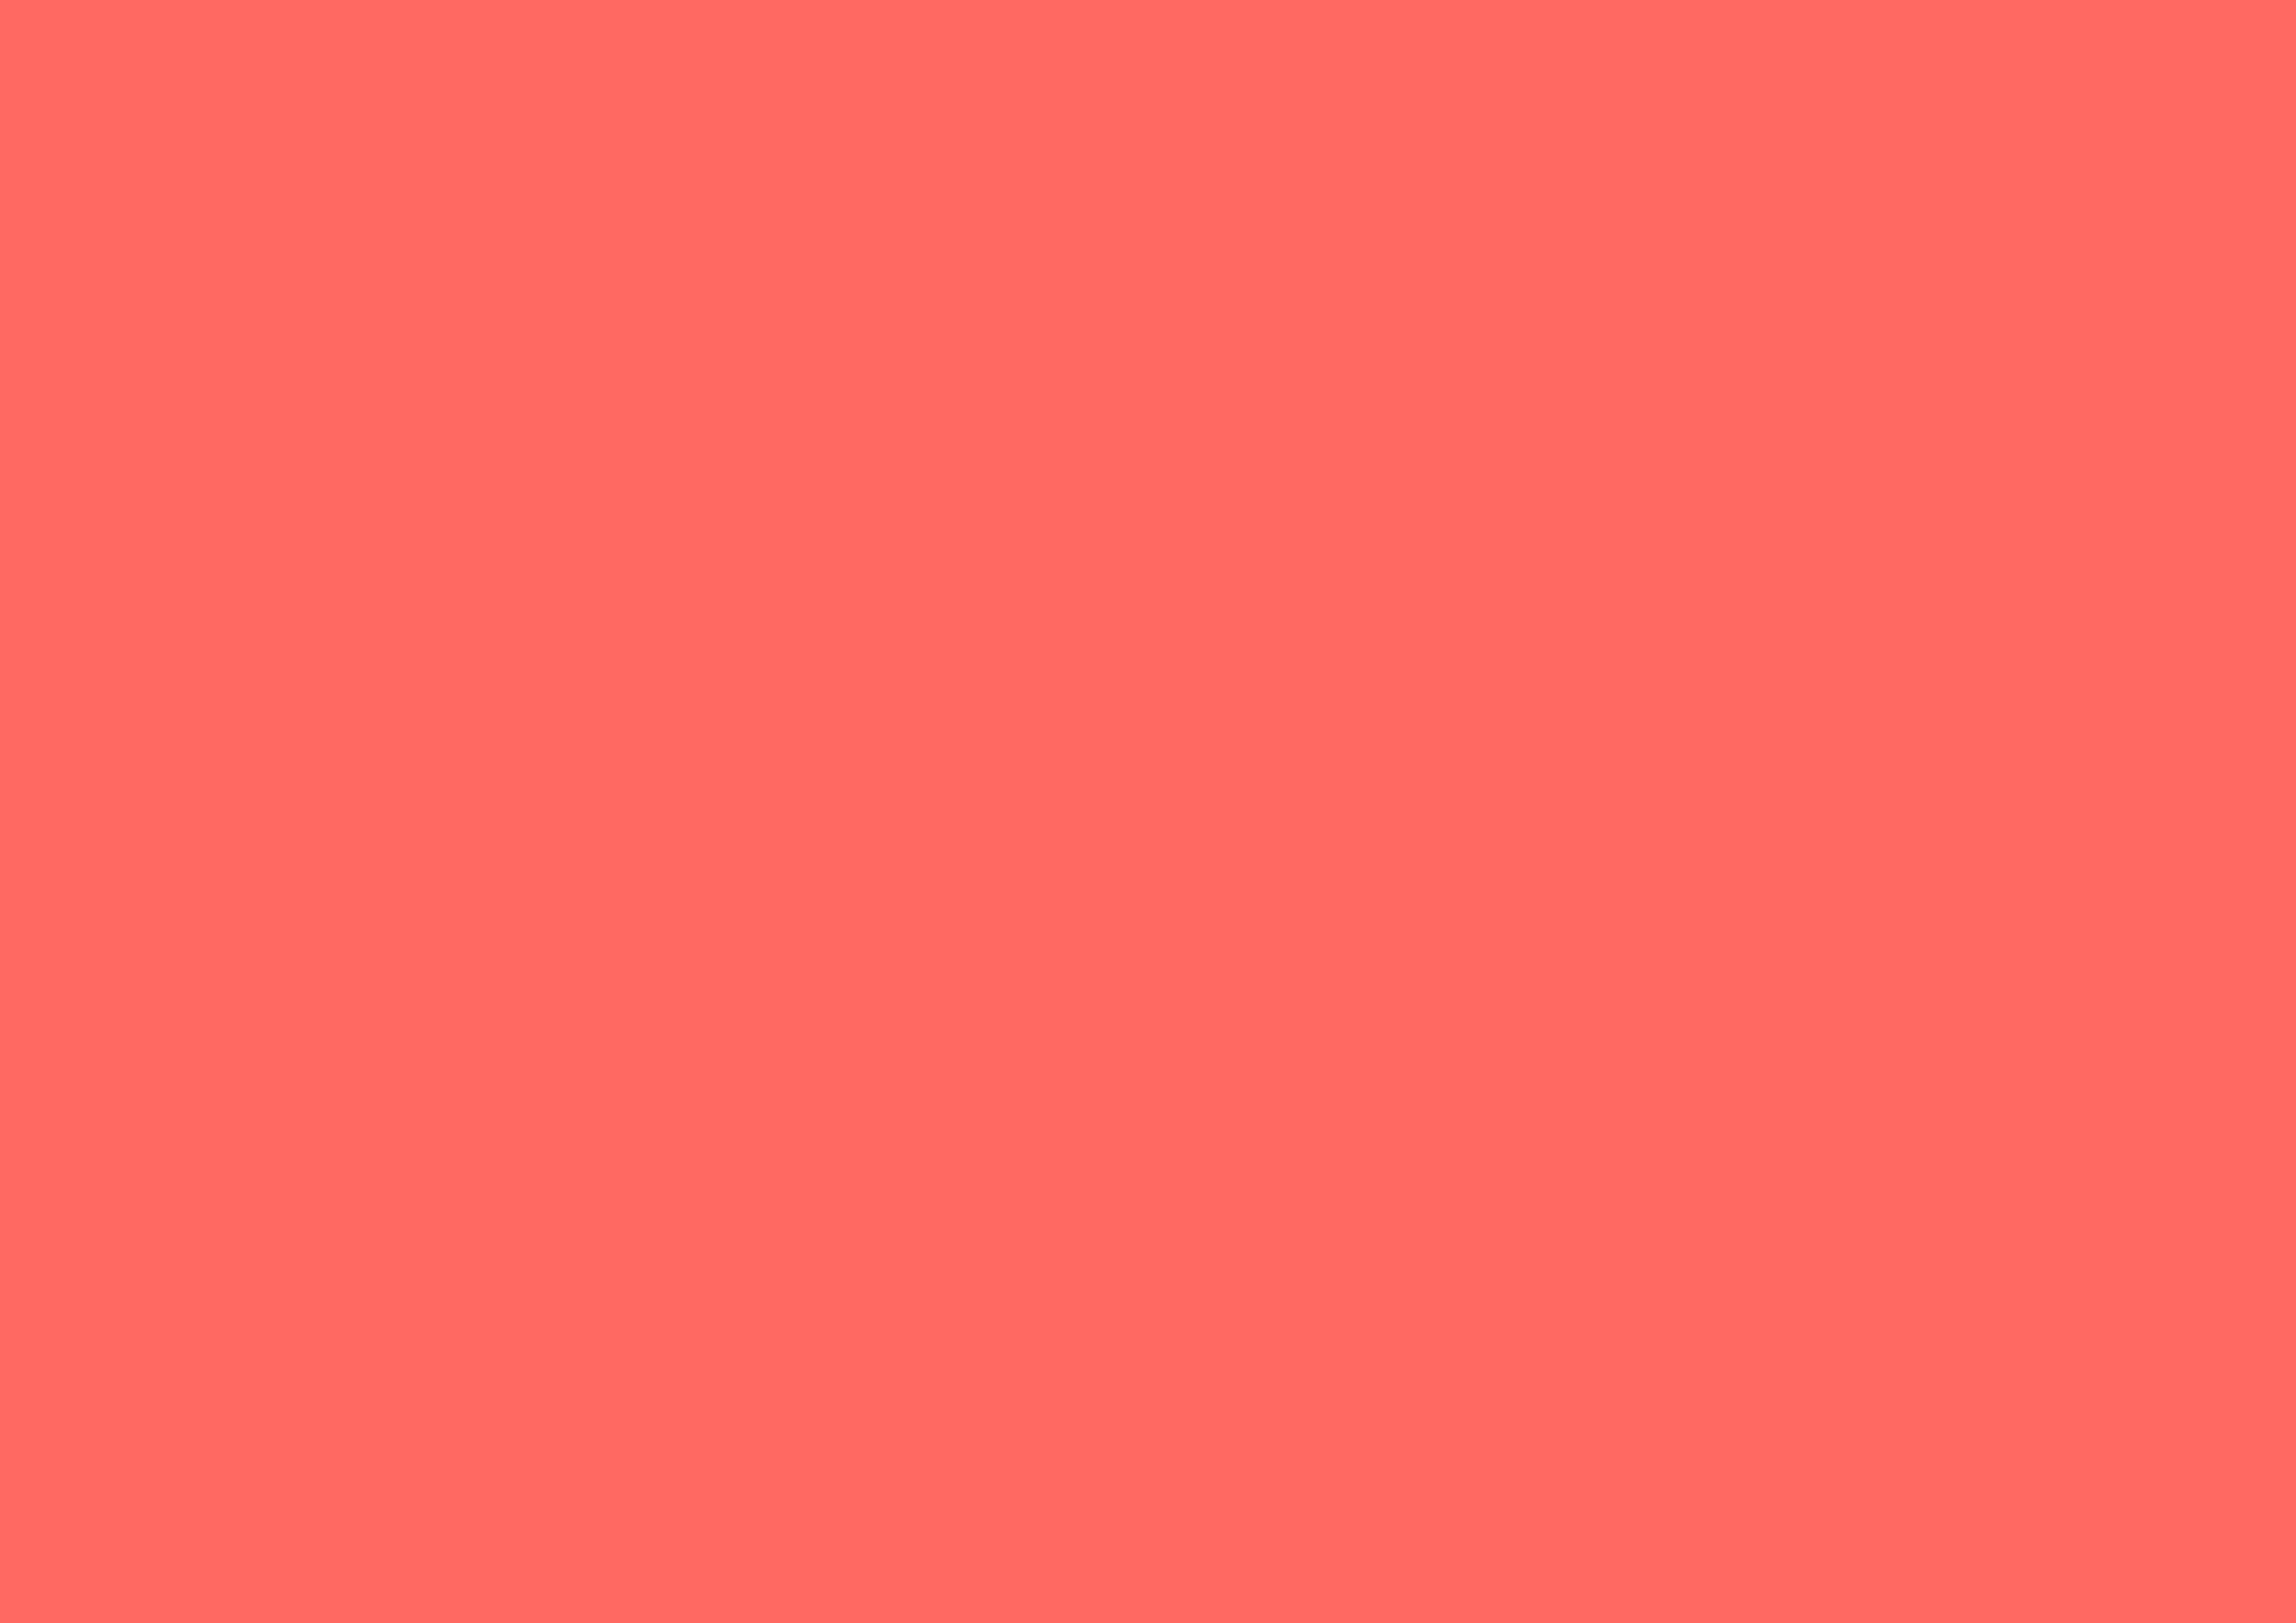 3508x2480 Pastel Red Solid Color Background